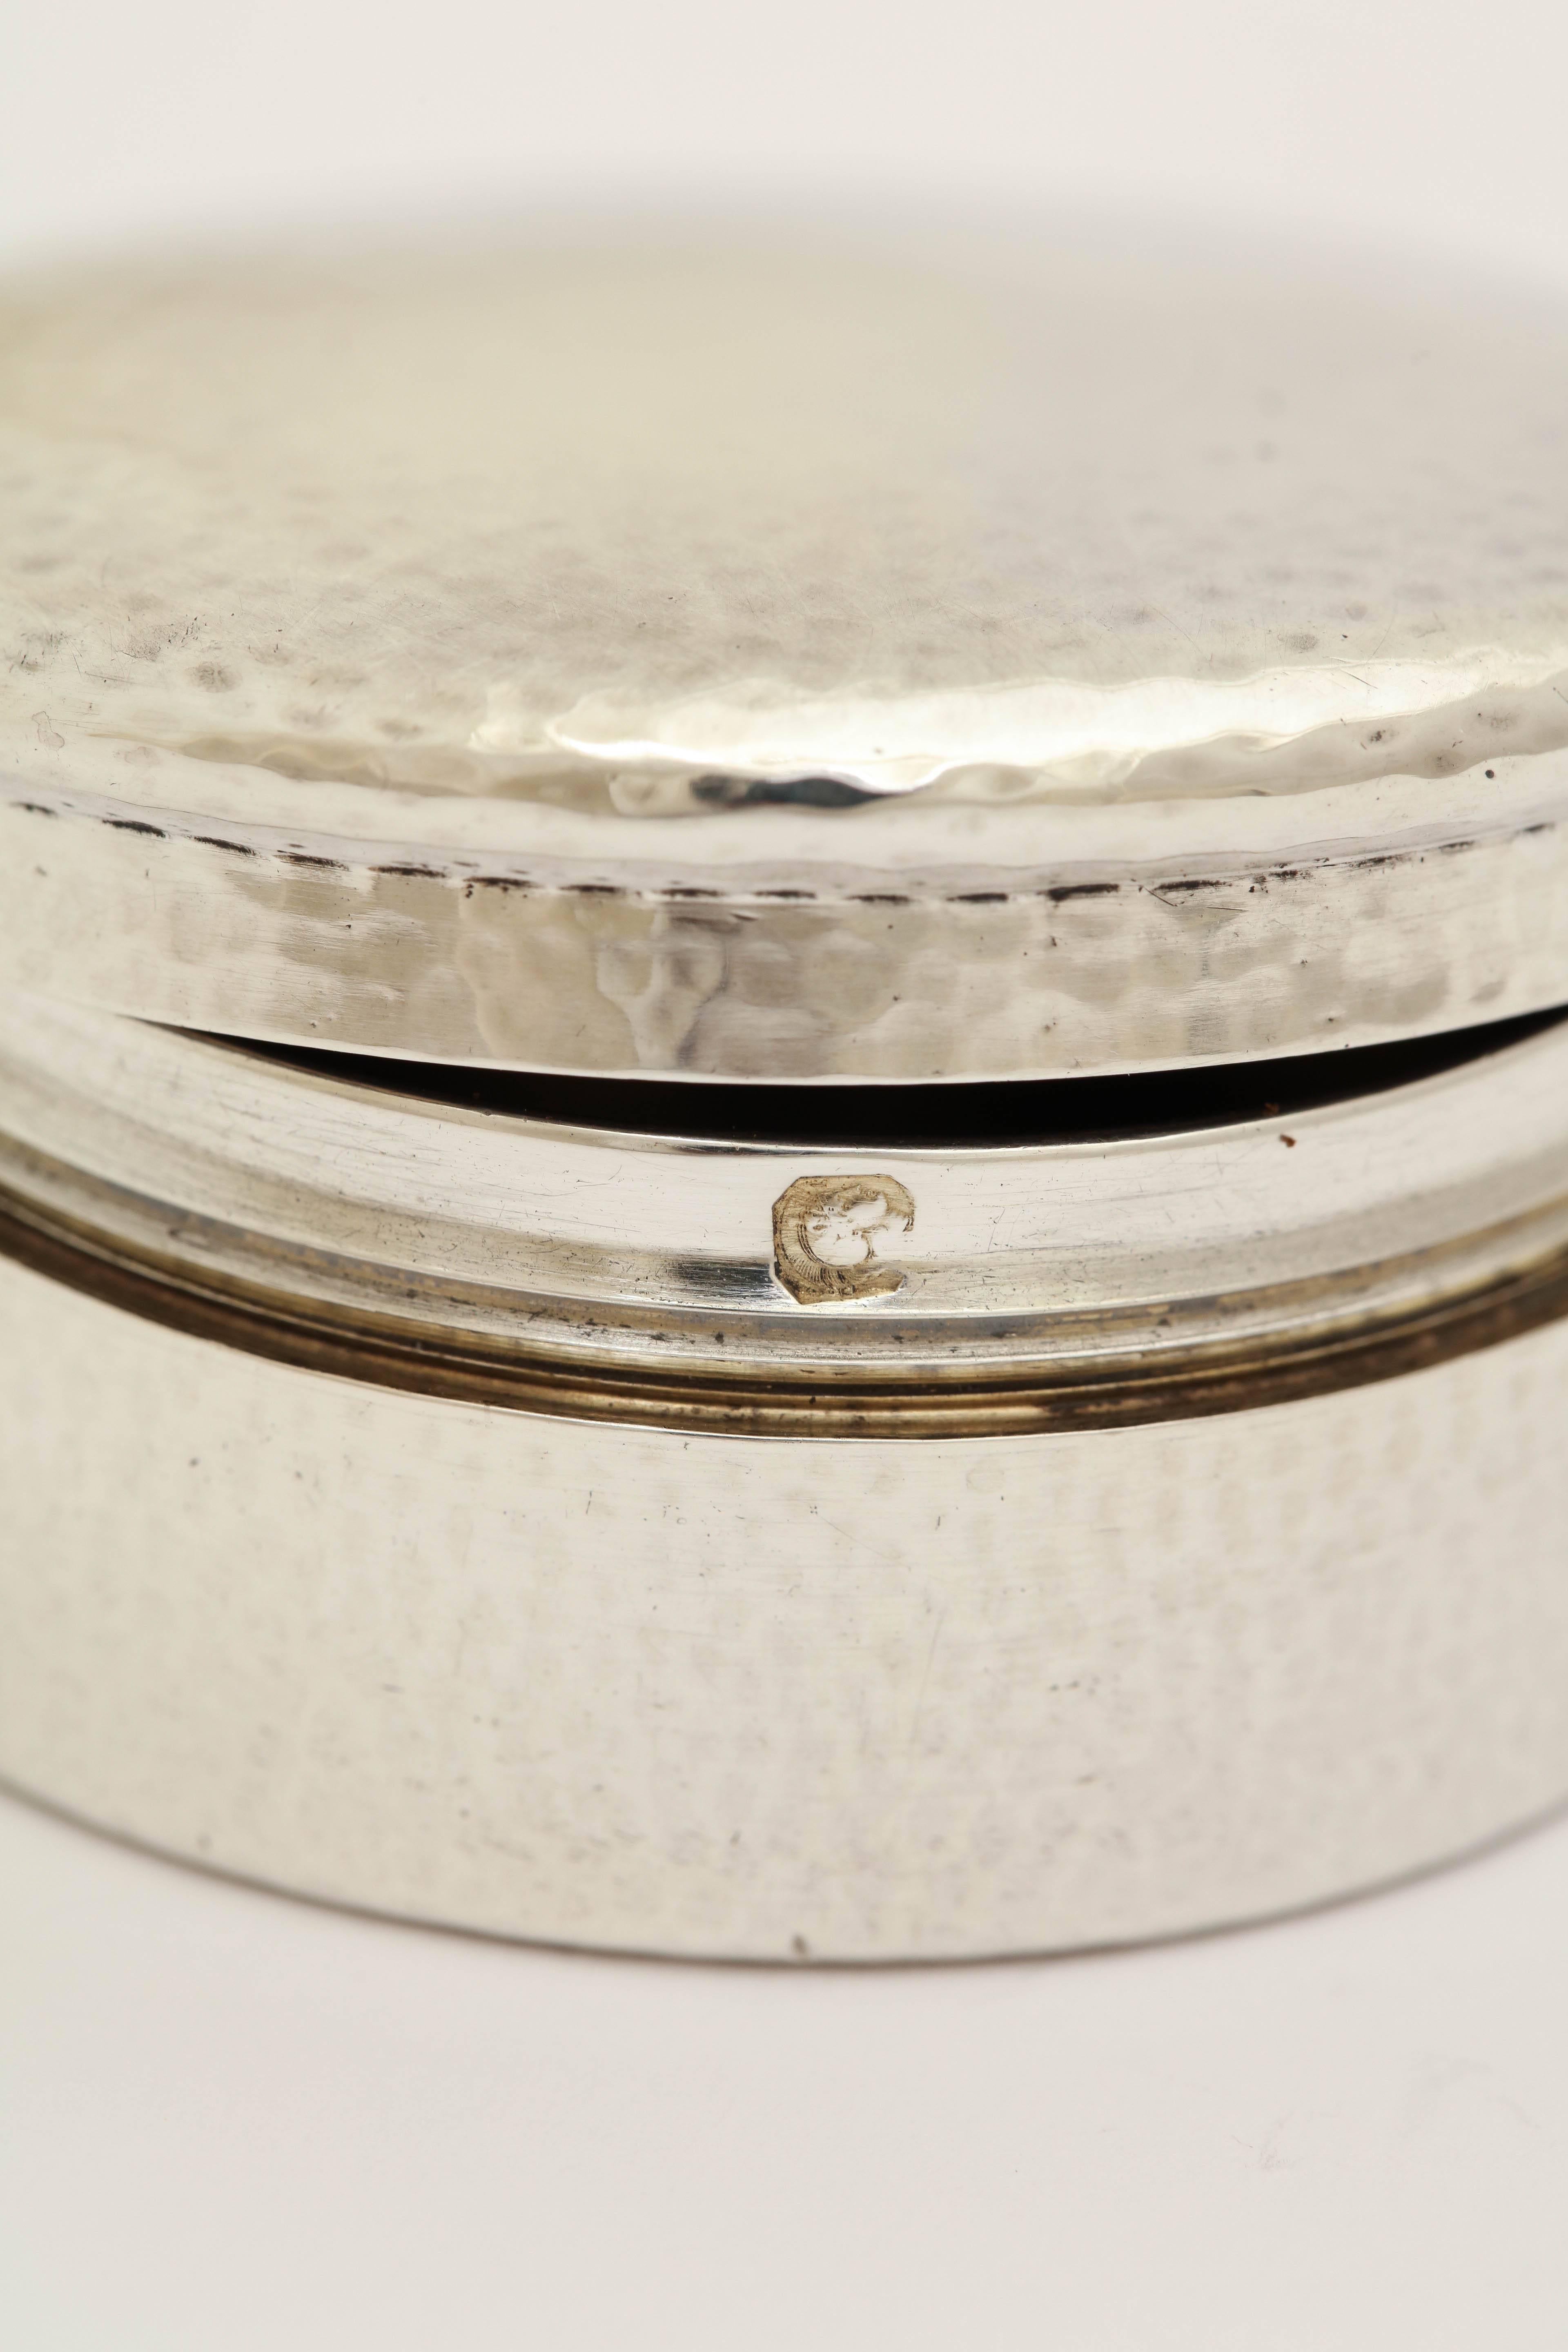 Gustave Keller Freres Pair of French Art Deco Sterling Silver Circular Boxes 2